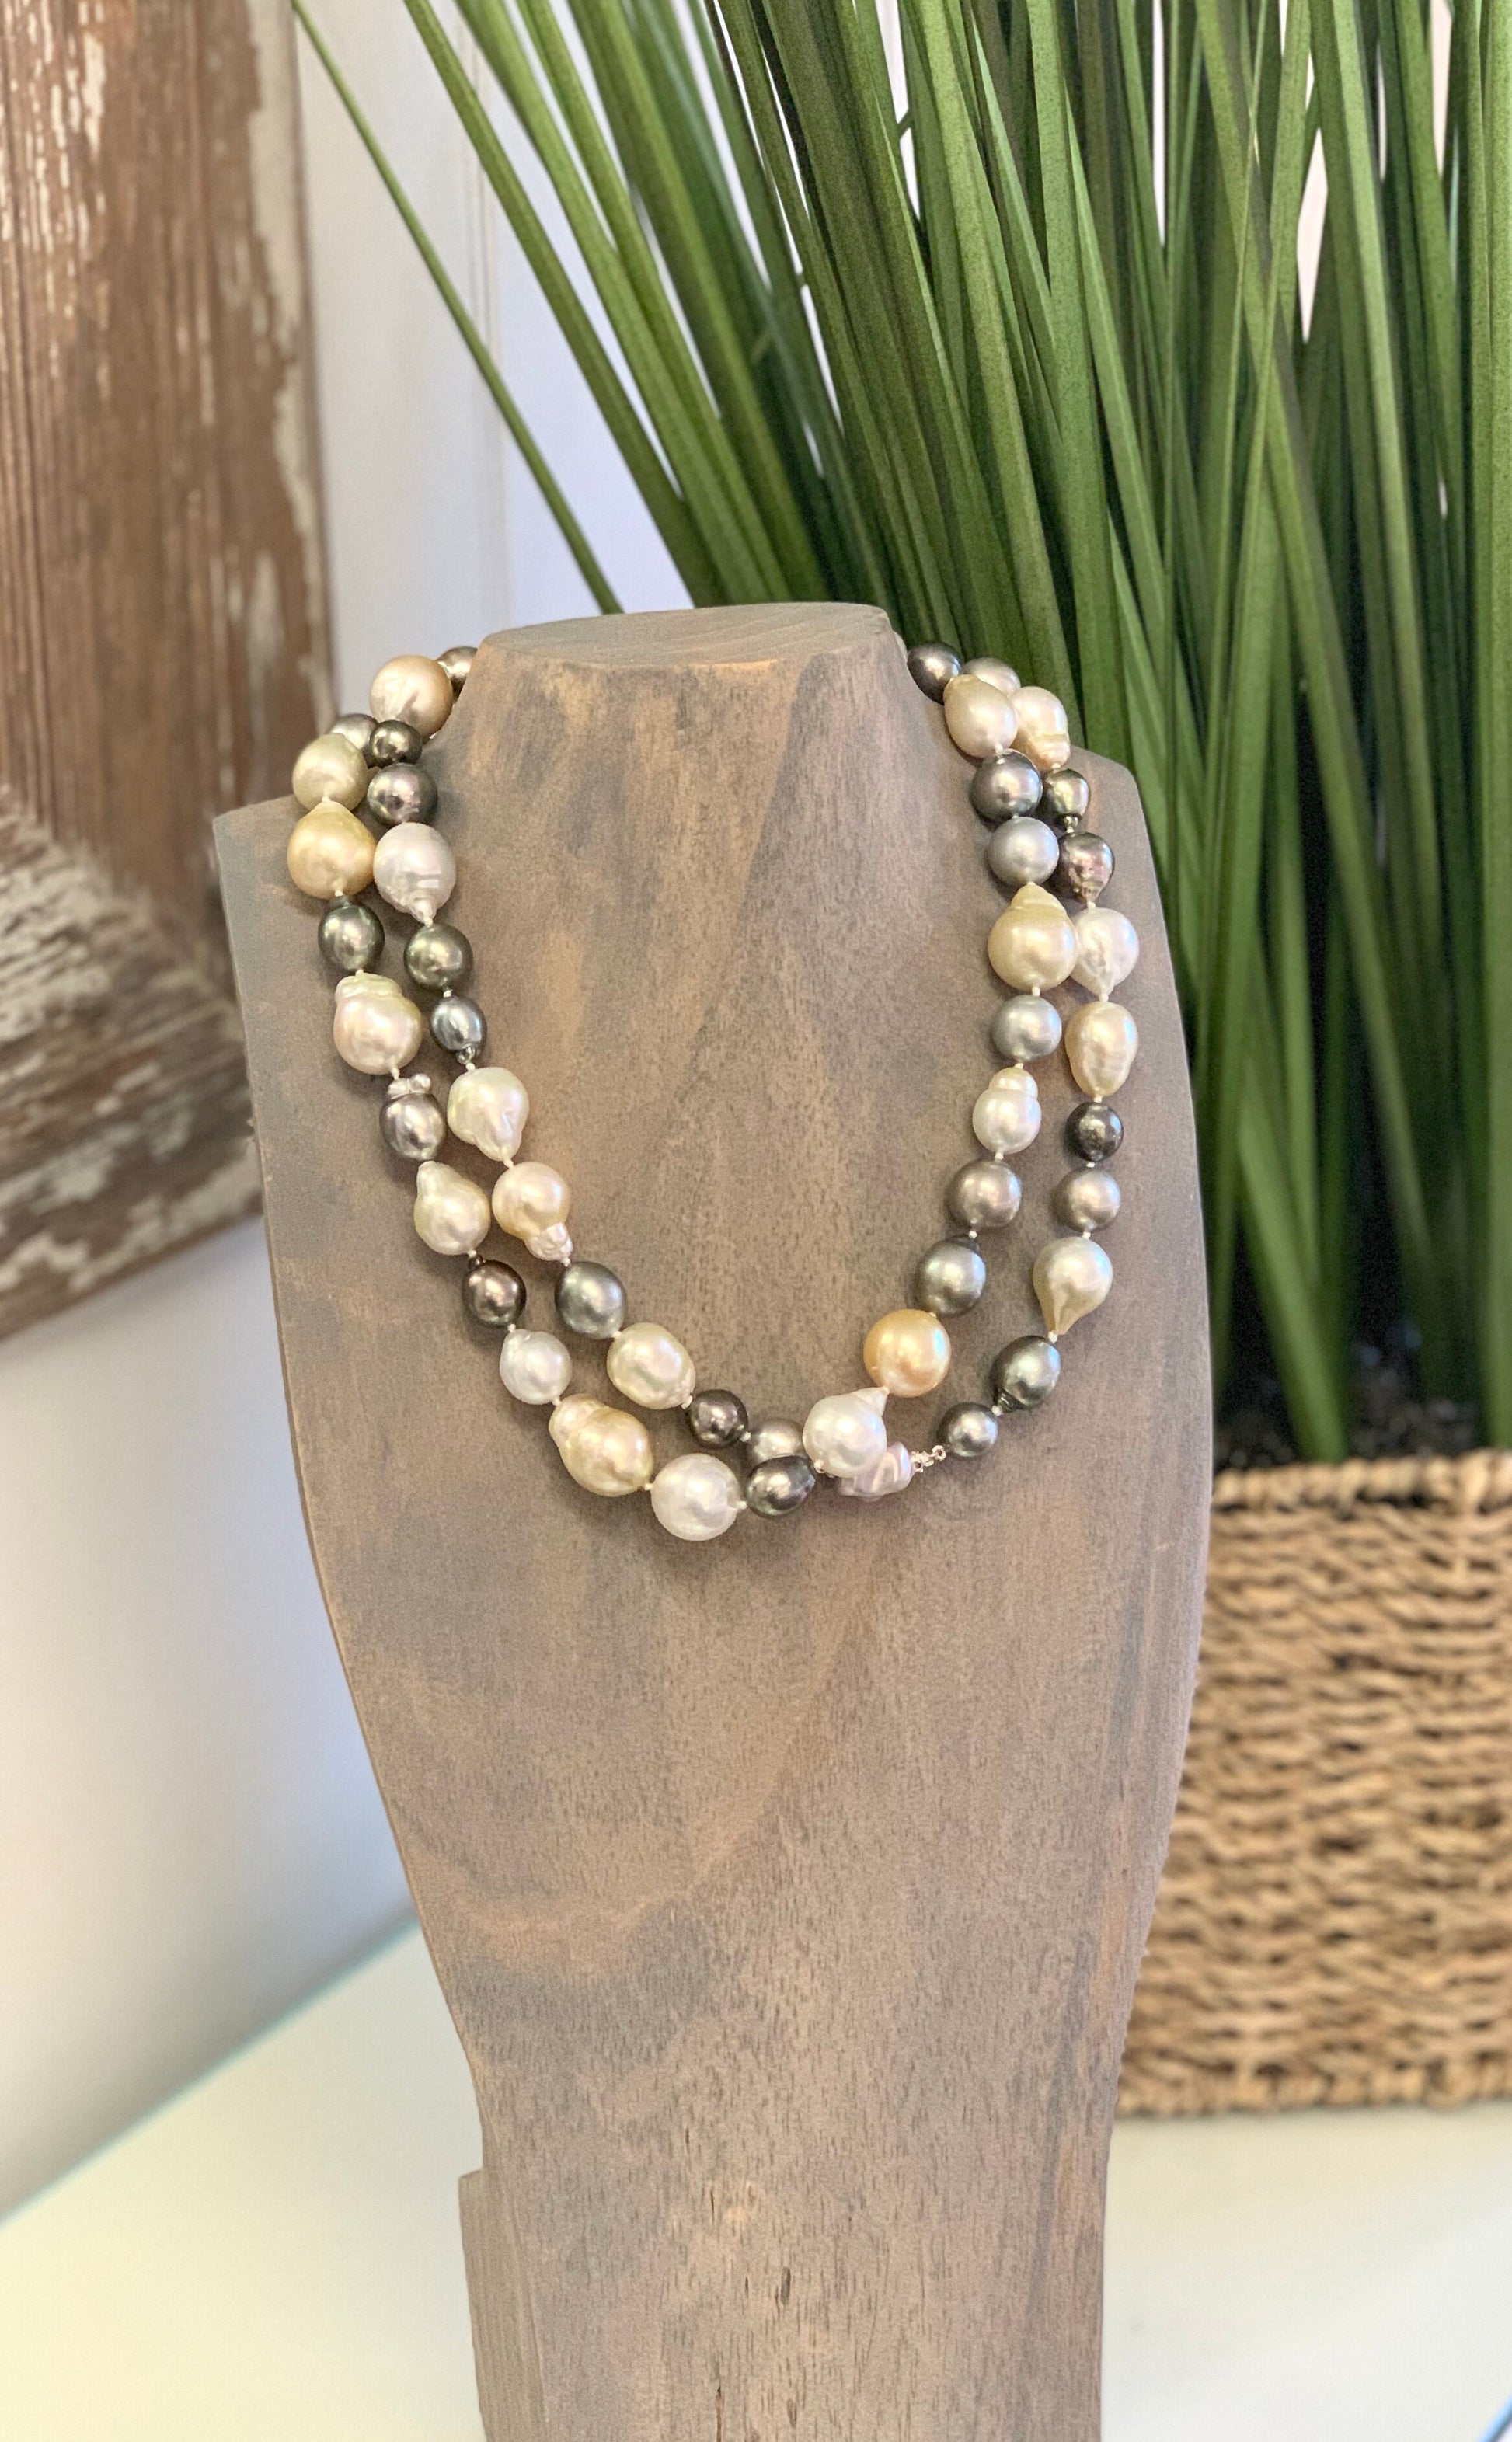 Amazing Multicolor Tahitian and South Sea Pearl Necklace with 14K White Gold clasp handmade by Jewel in the Sea Nantucket